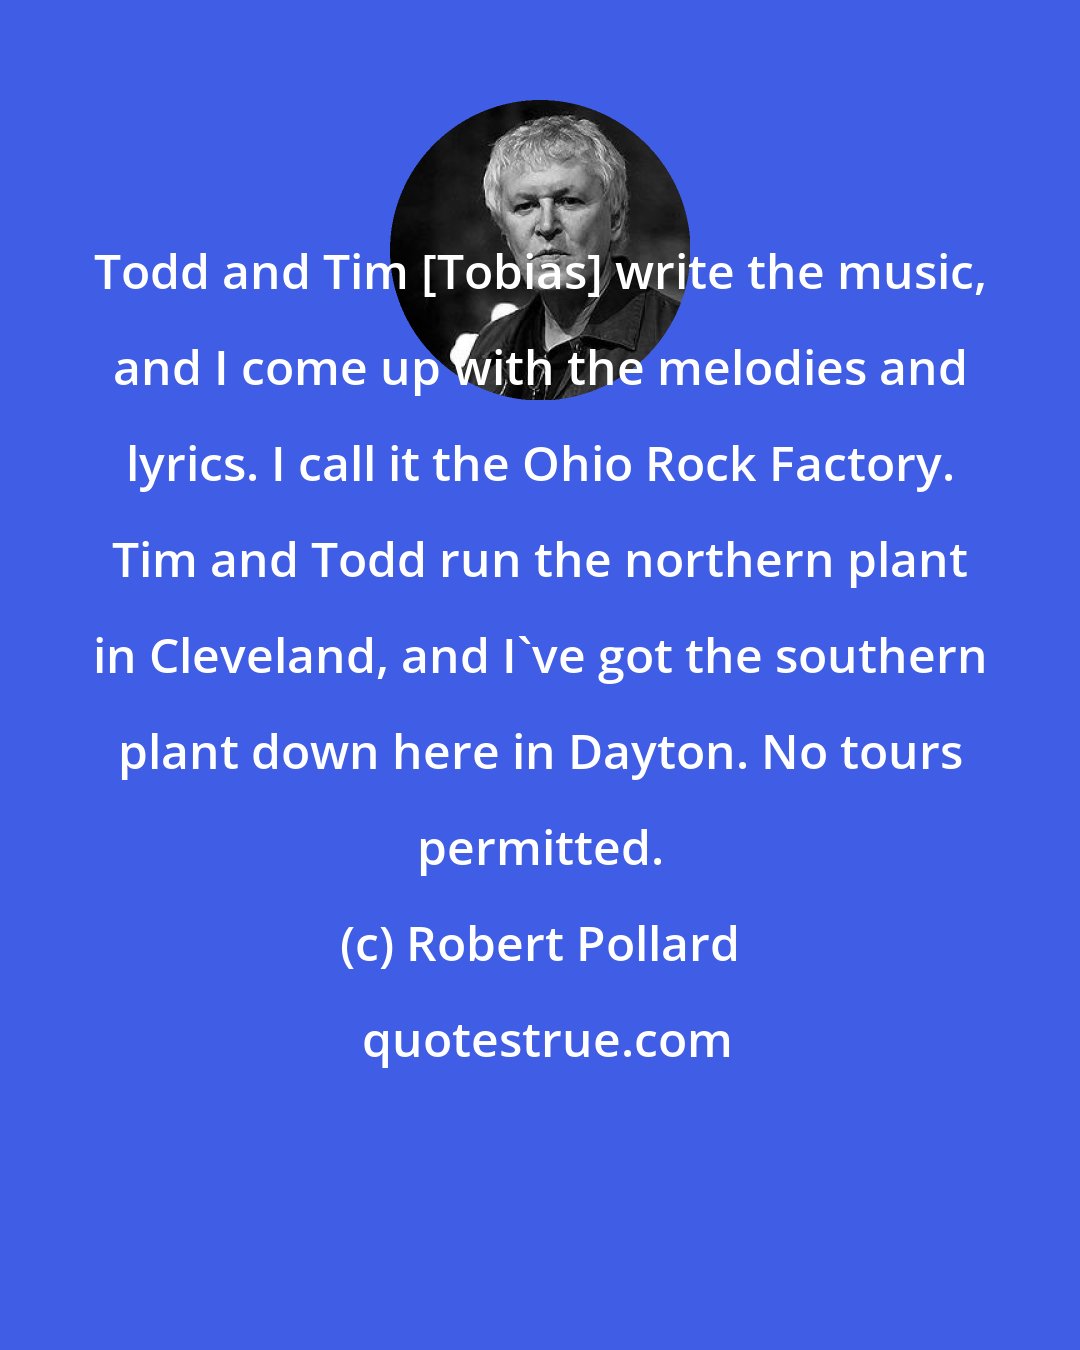 Robert Pollard: Todd and Tim [Tobias] write the music, and I come up with the melodies and lyrics. I call it the Ohio Rock Factory. Tim and Todd run the northern plant in Cleveland, and I've got the southern plant down here in Dayton. No tours permitted.